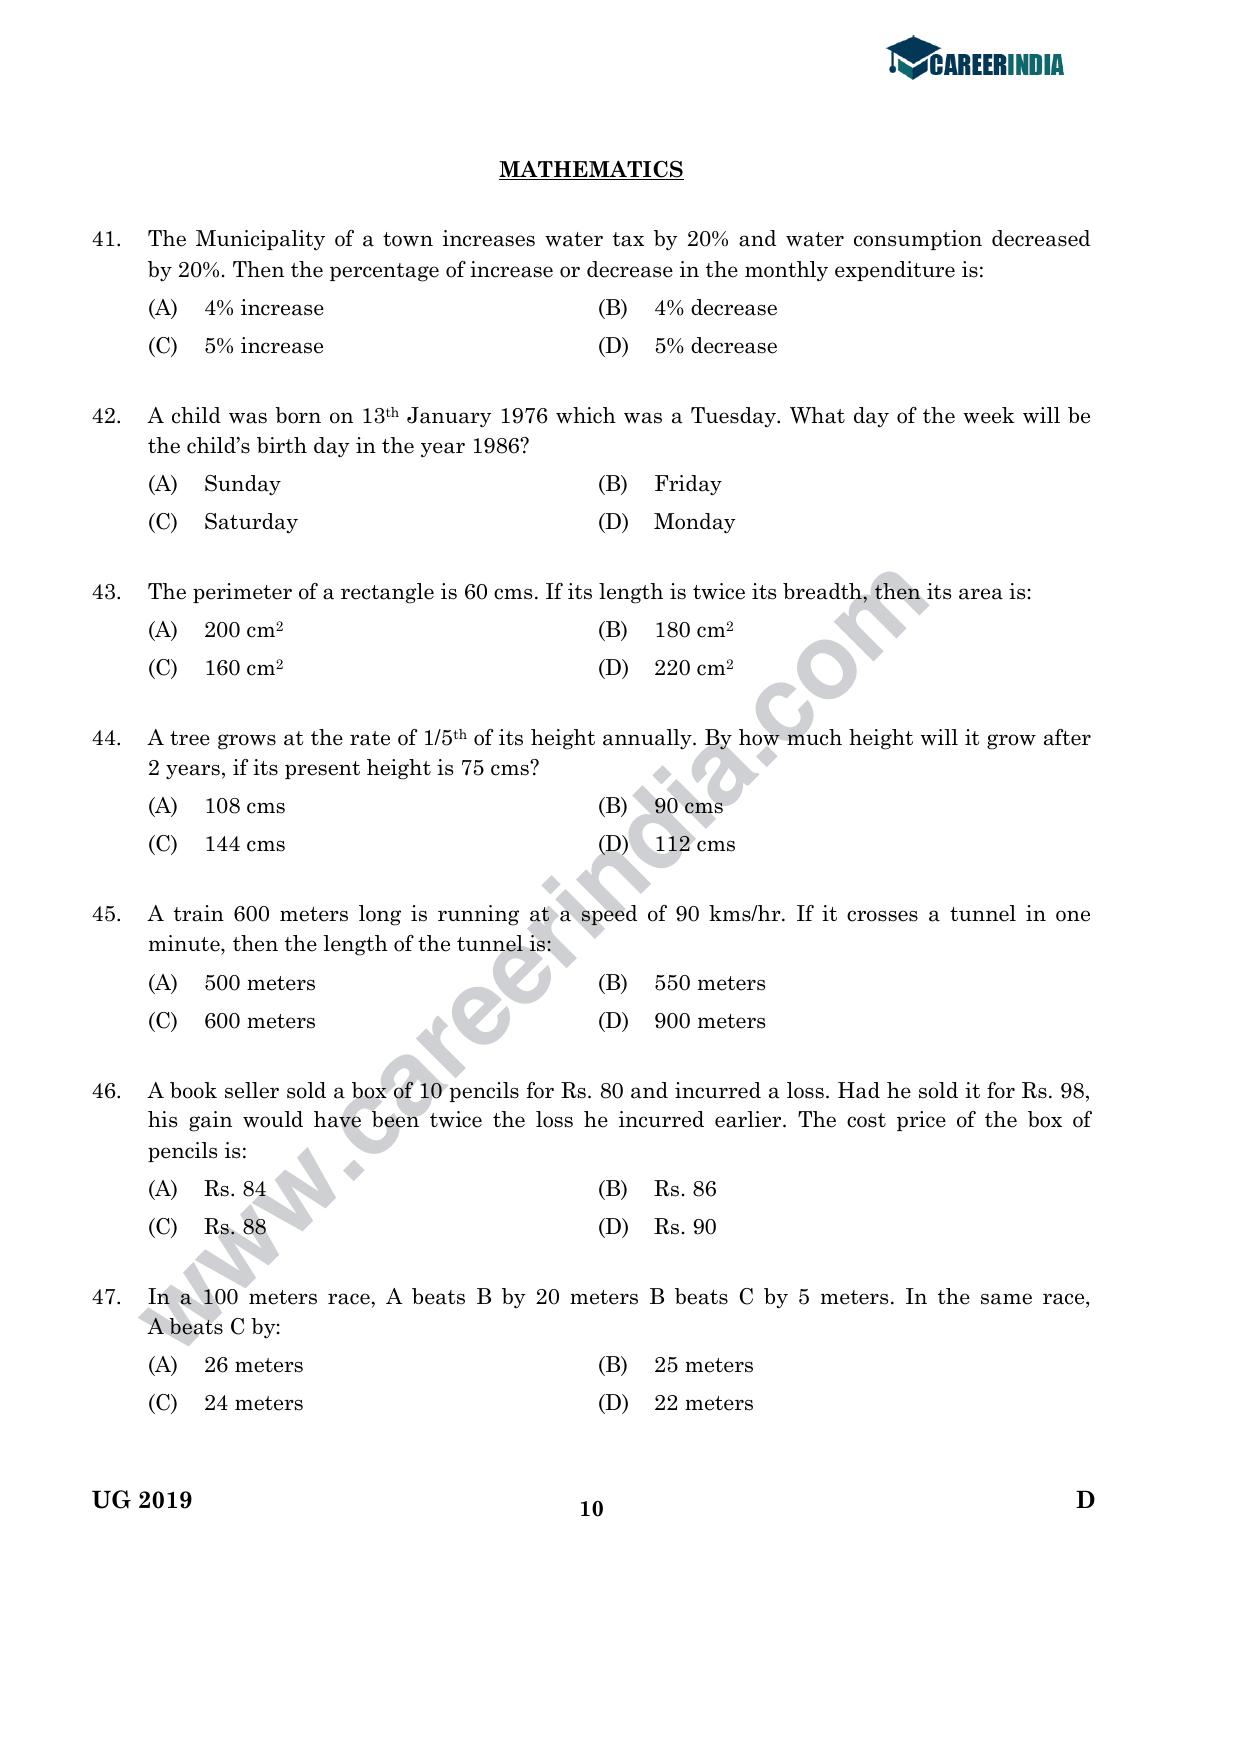 CLAT 2019 UG Logical-Reasoning Question Paper - Page 9